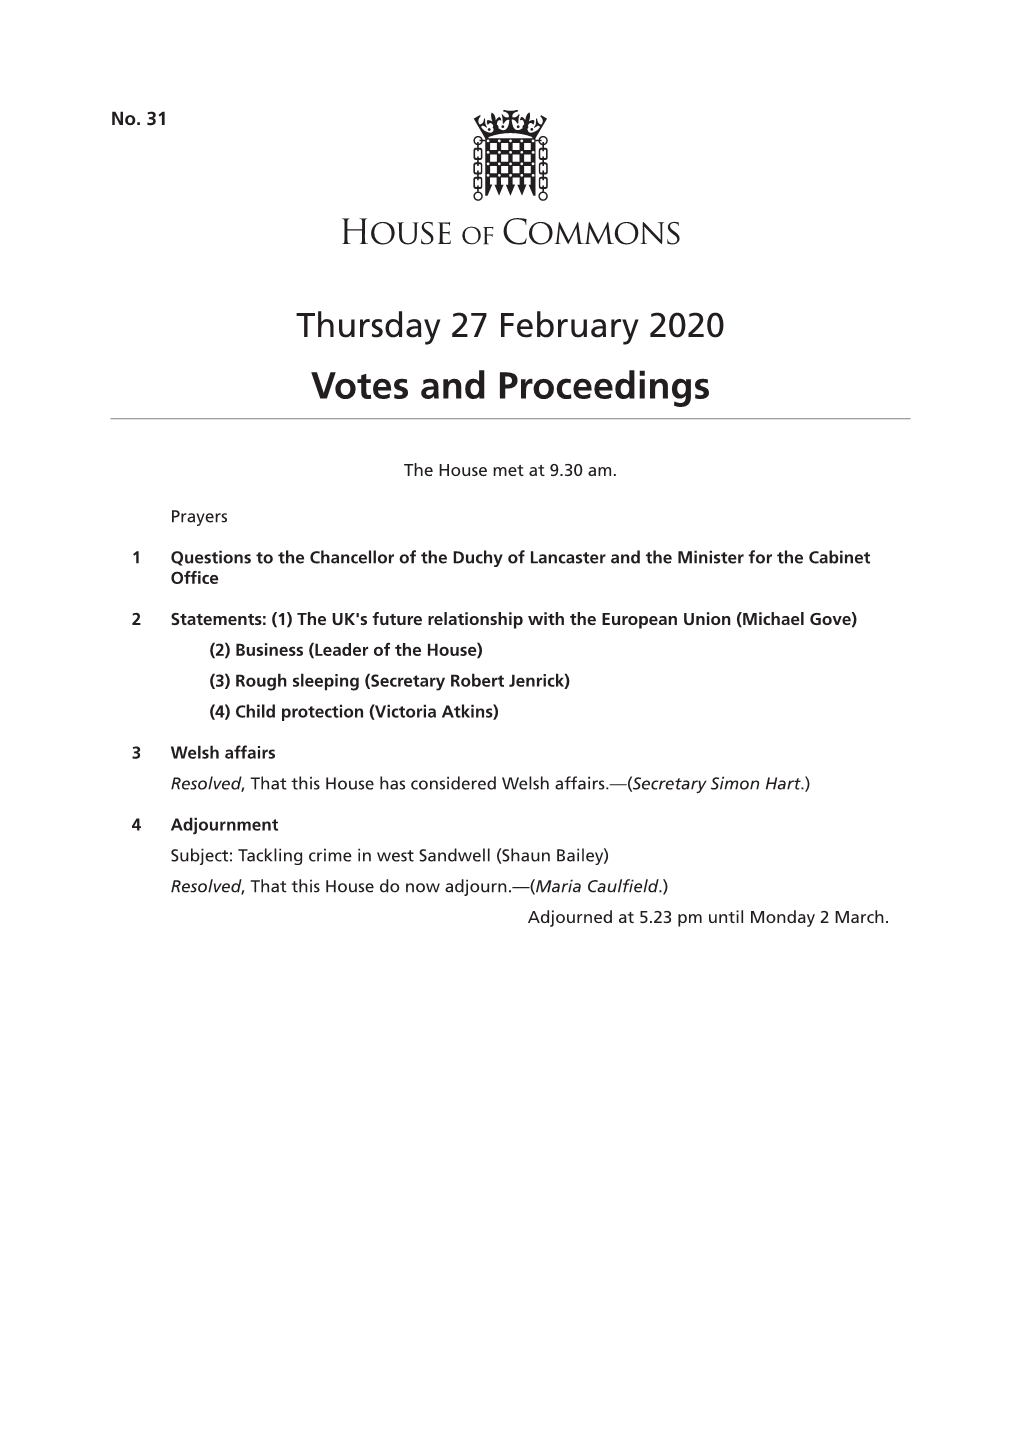 Votes and Proceedings for 27 Feb 2020